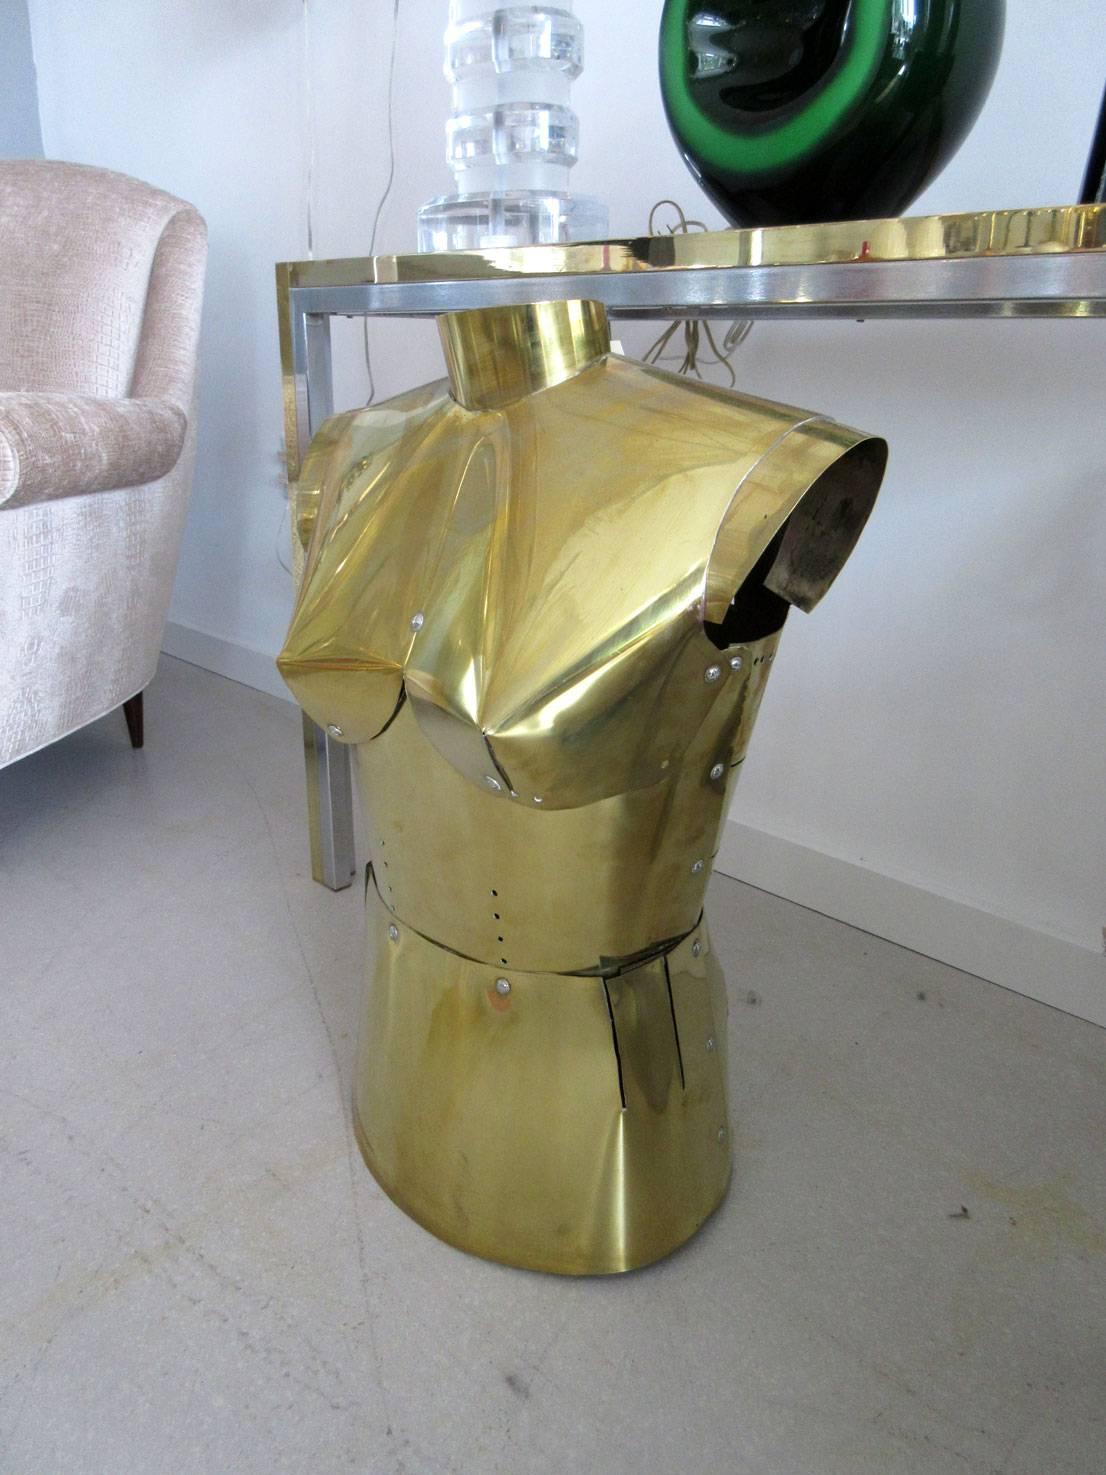 Geometric modern, retro-futurist brass torso, reminiscent of the female android in Fritz Lang's Classic film 'Metropolis.' Clean angular lines. Made in France in the 1960s.